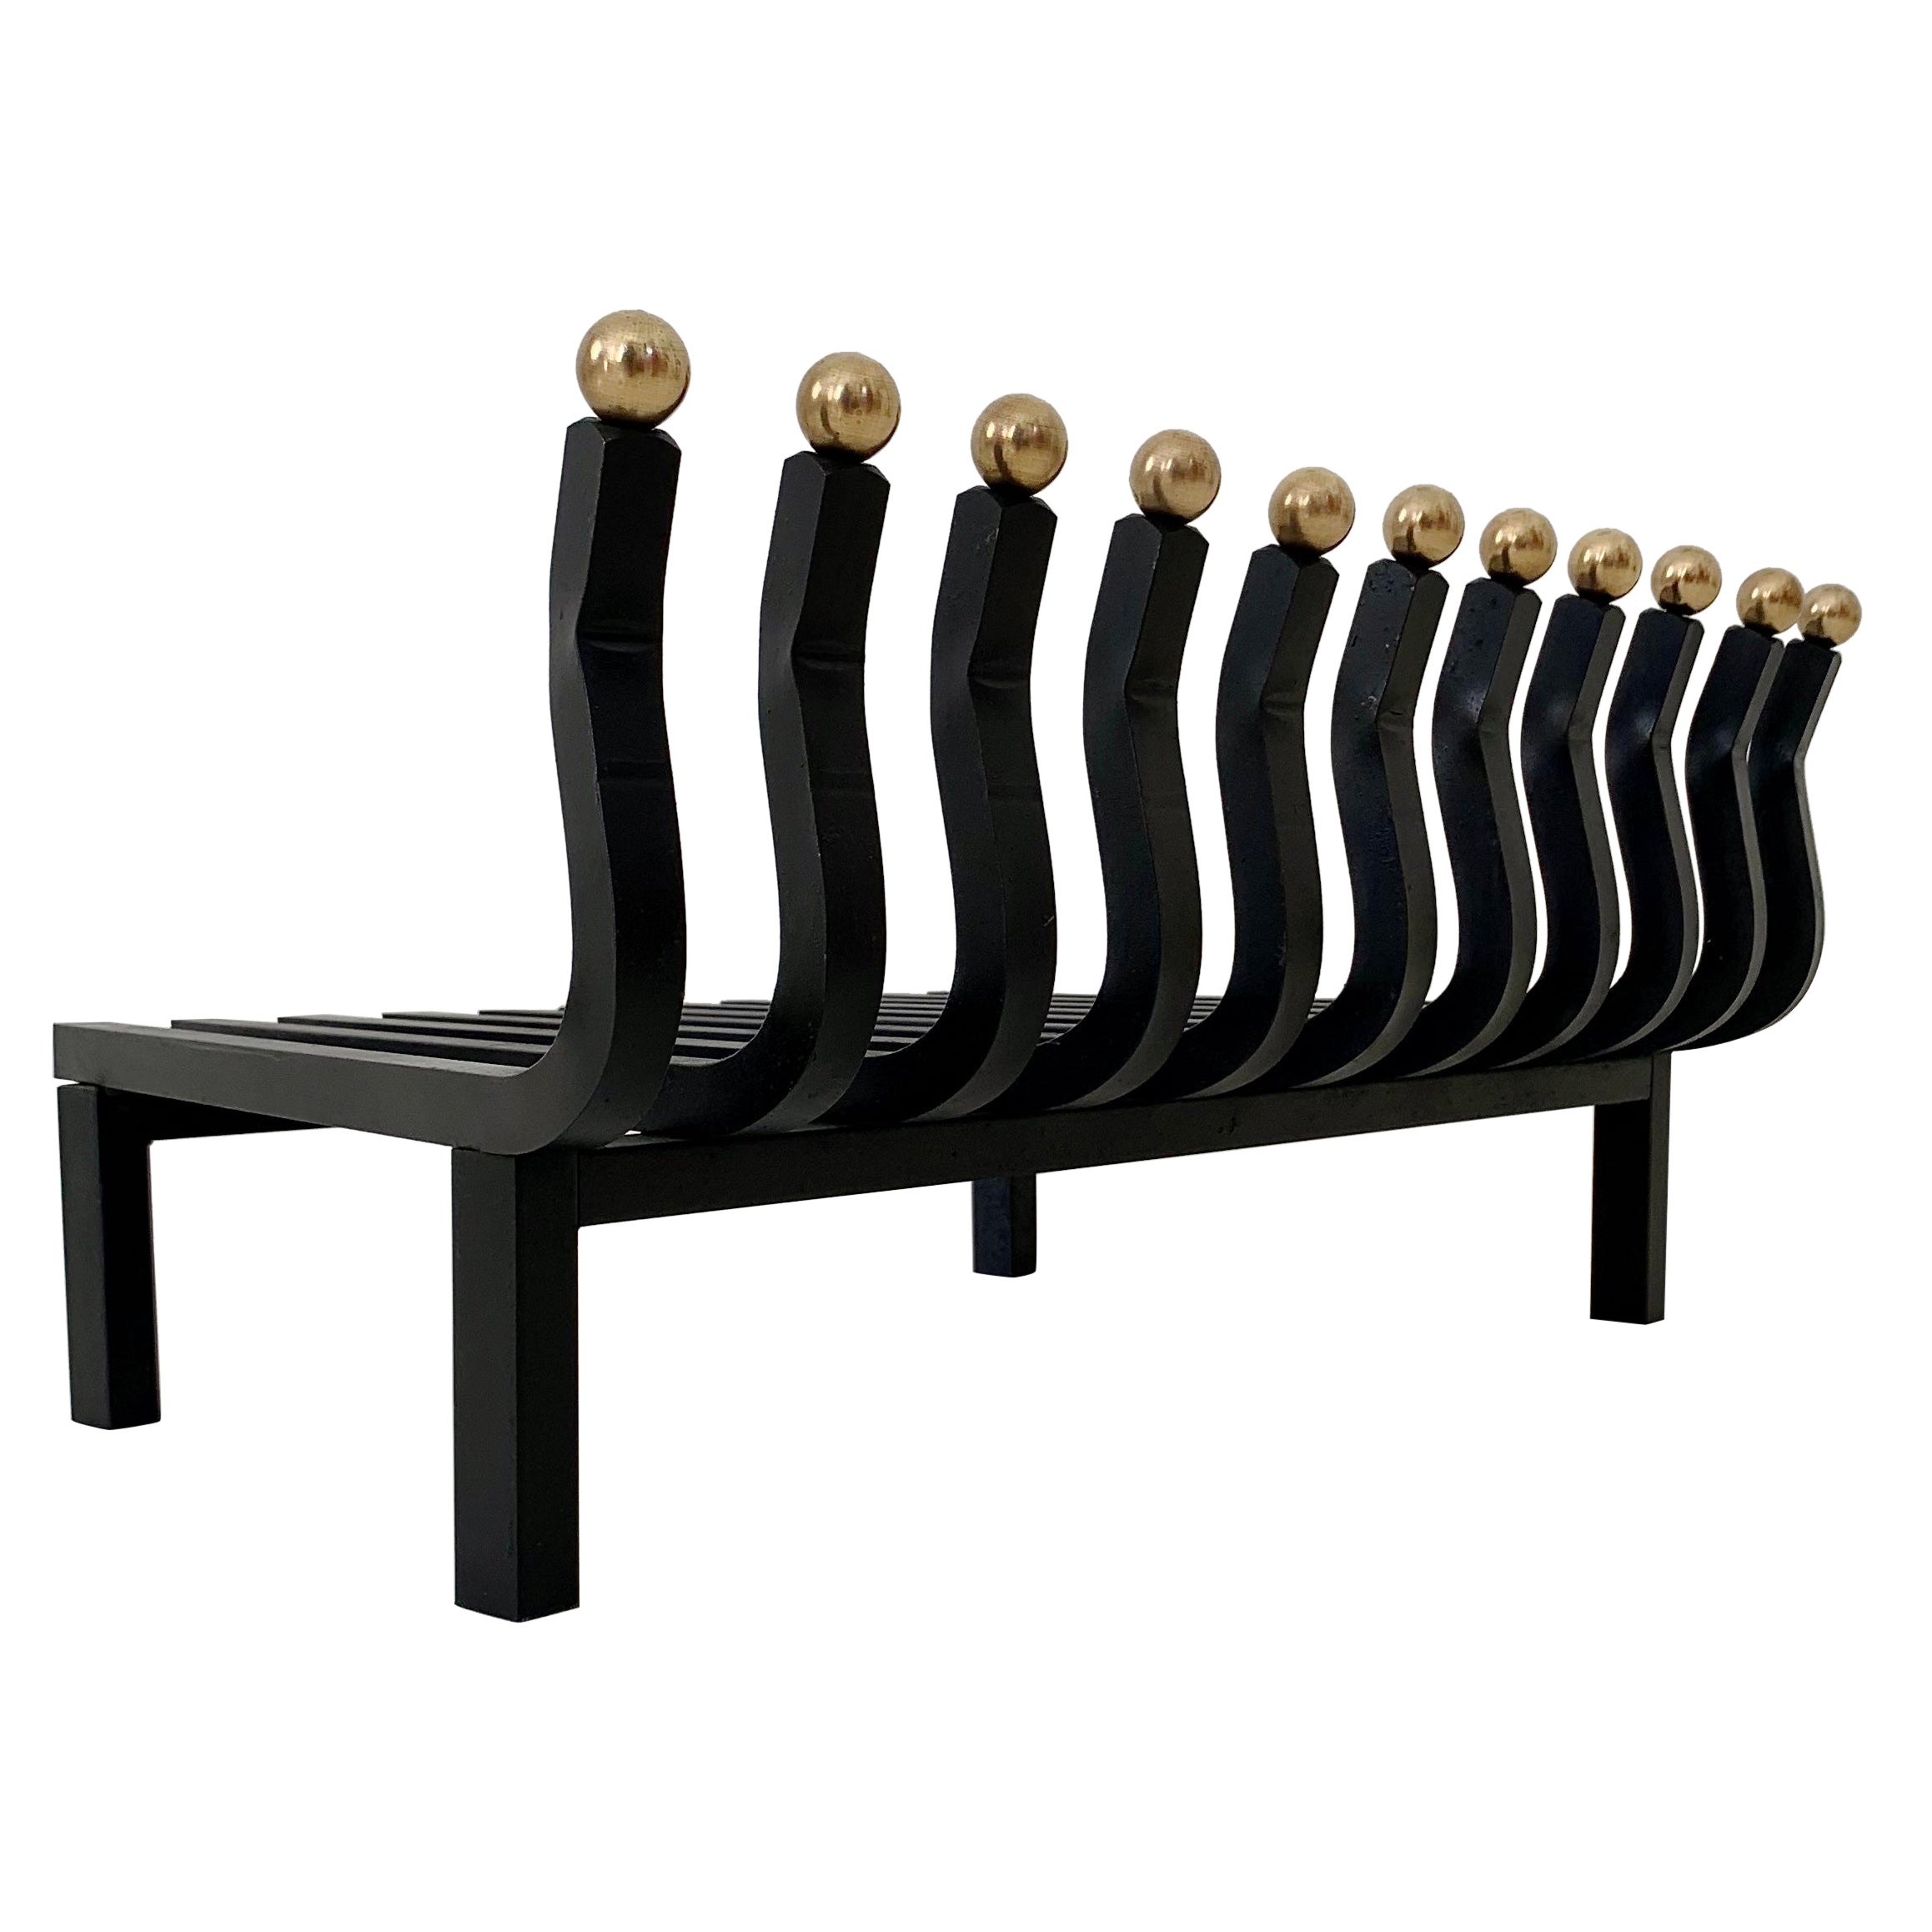 Elegant mid-century andirons, circa 1960, France.
Wrought-iron bars finished with 11 decorative brass balls.
Dimensions: 51 cm W, 32 cm D, 24 cm H.
Good condition.
All purchases are covered by our Buyer Protection Guarantee.
This item can be